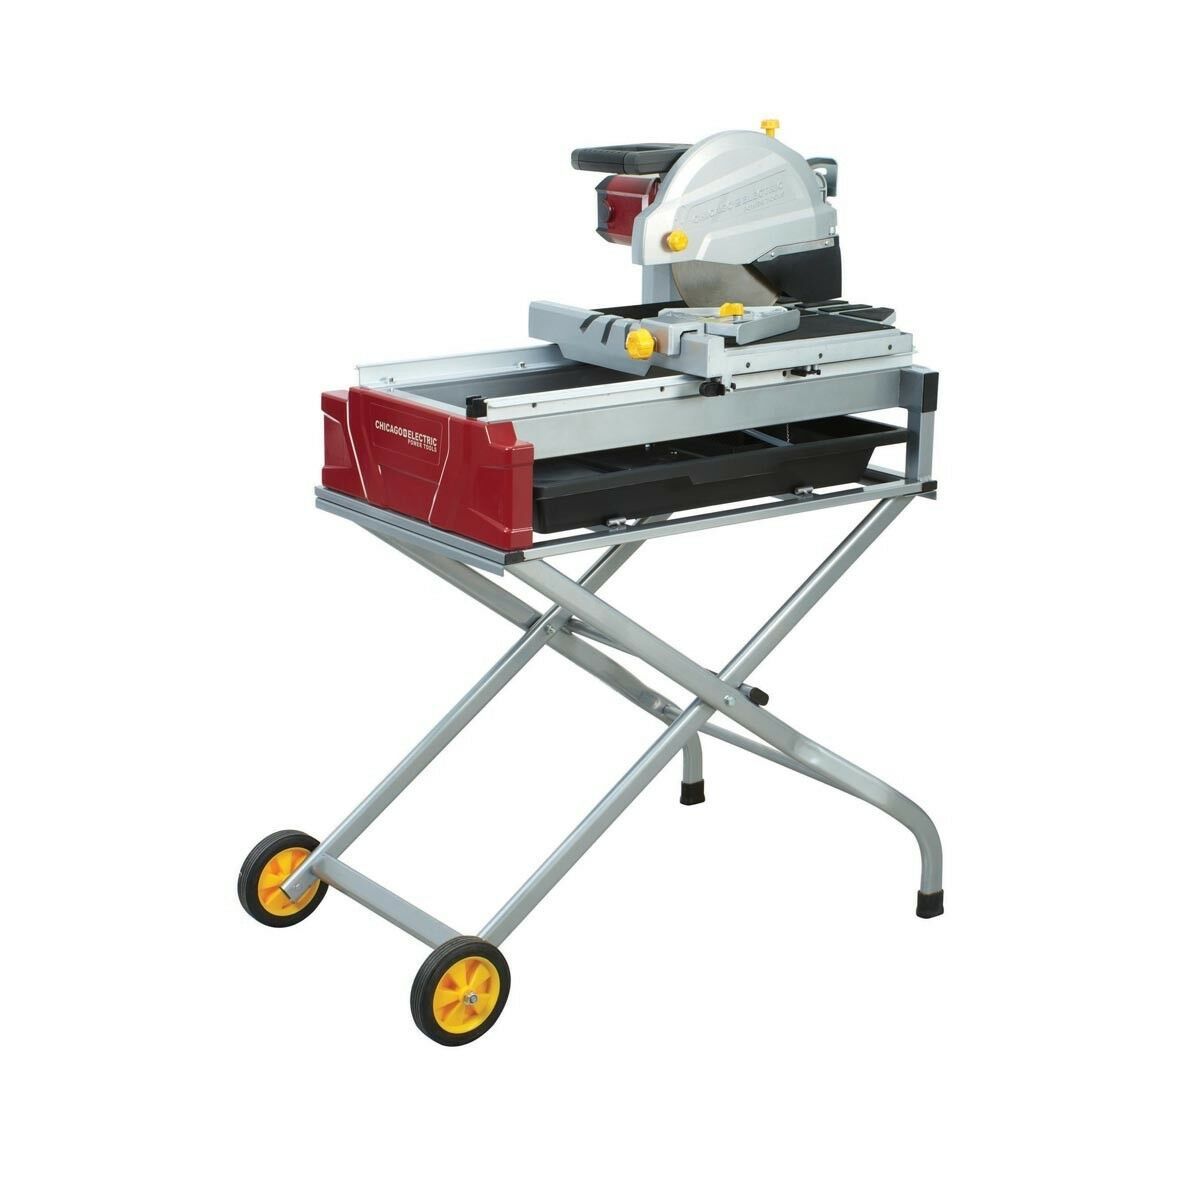 Chicago Electric 10 in. 2.5 HP Tile/Brick Saw - Tile Saws